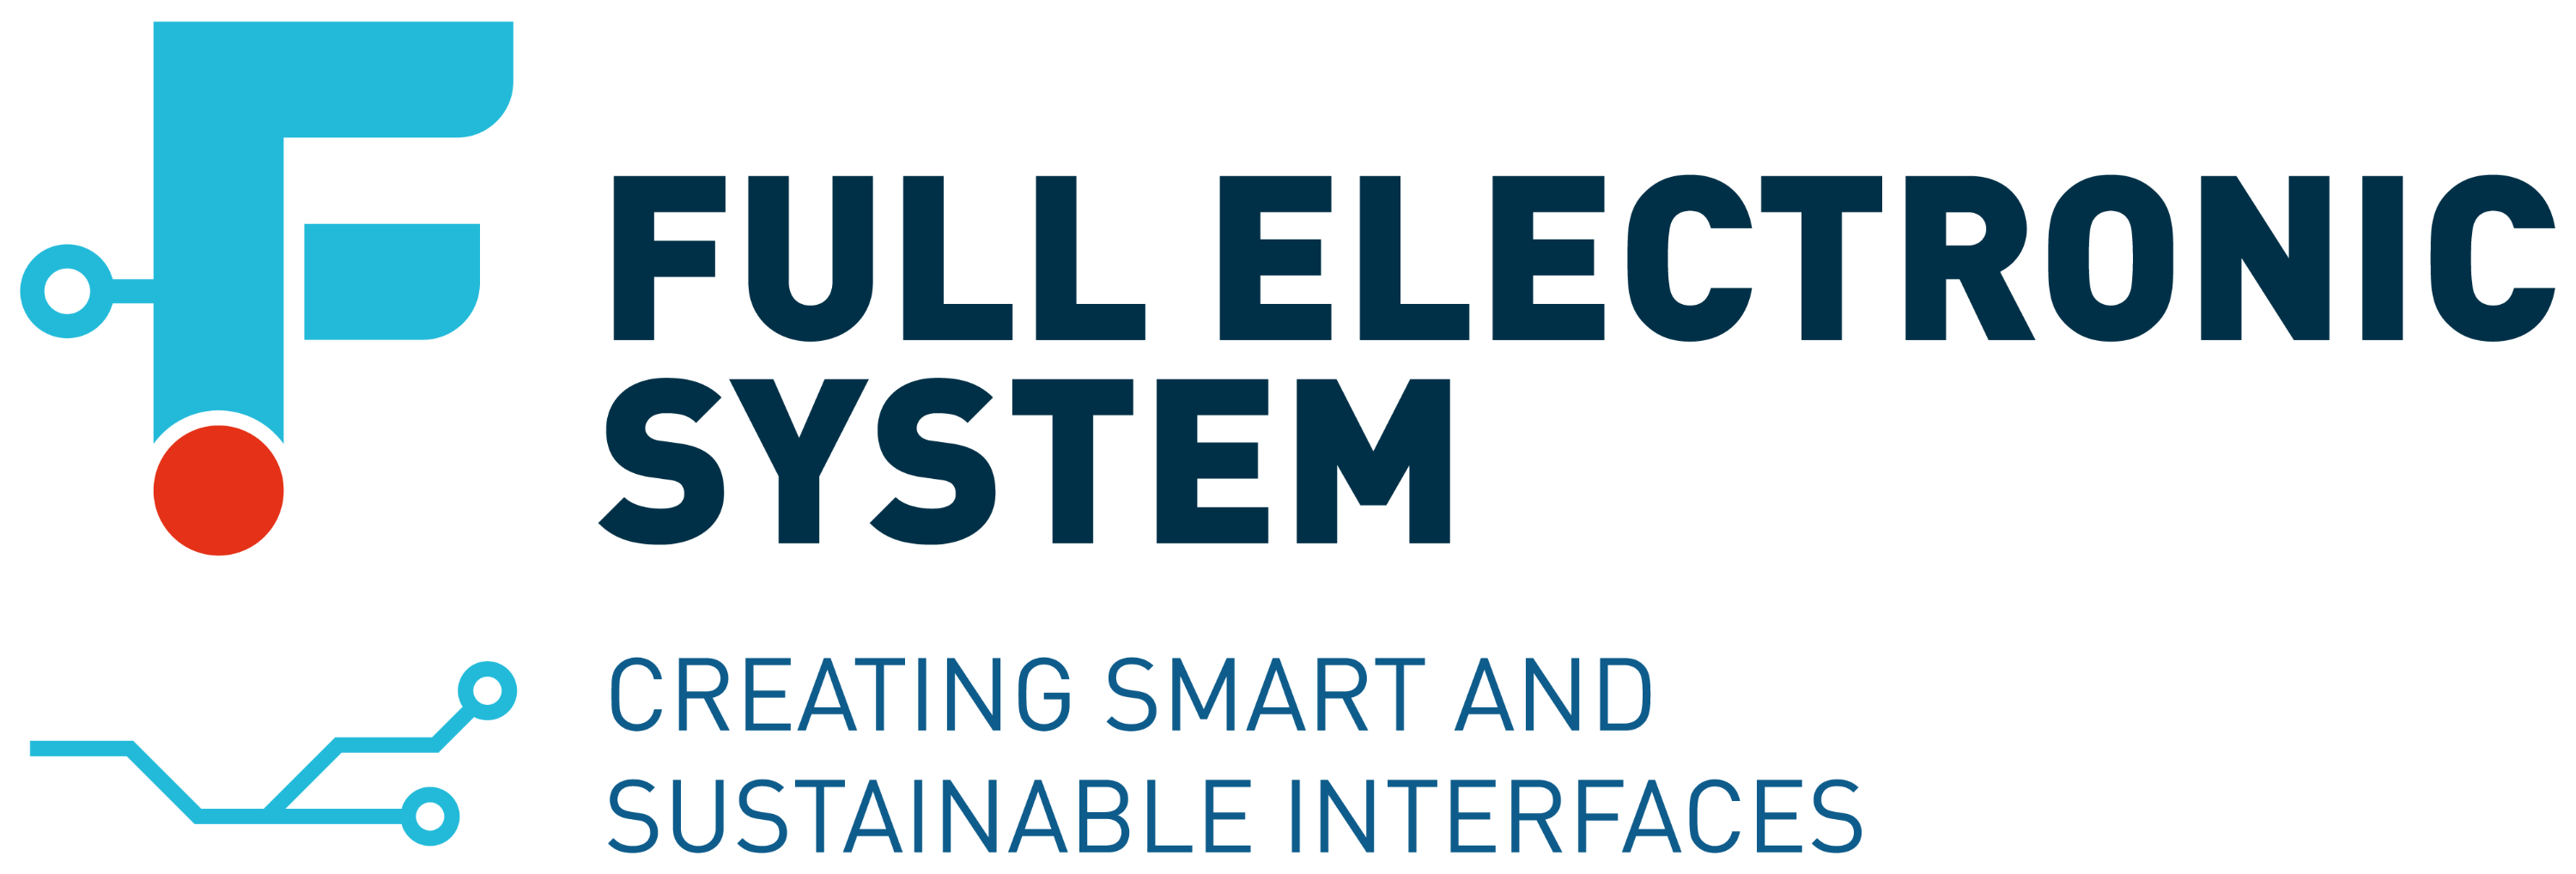 FULL ELECTRONIC SYSTEM